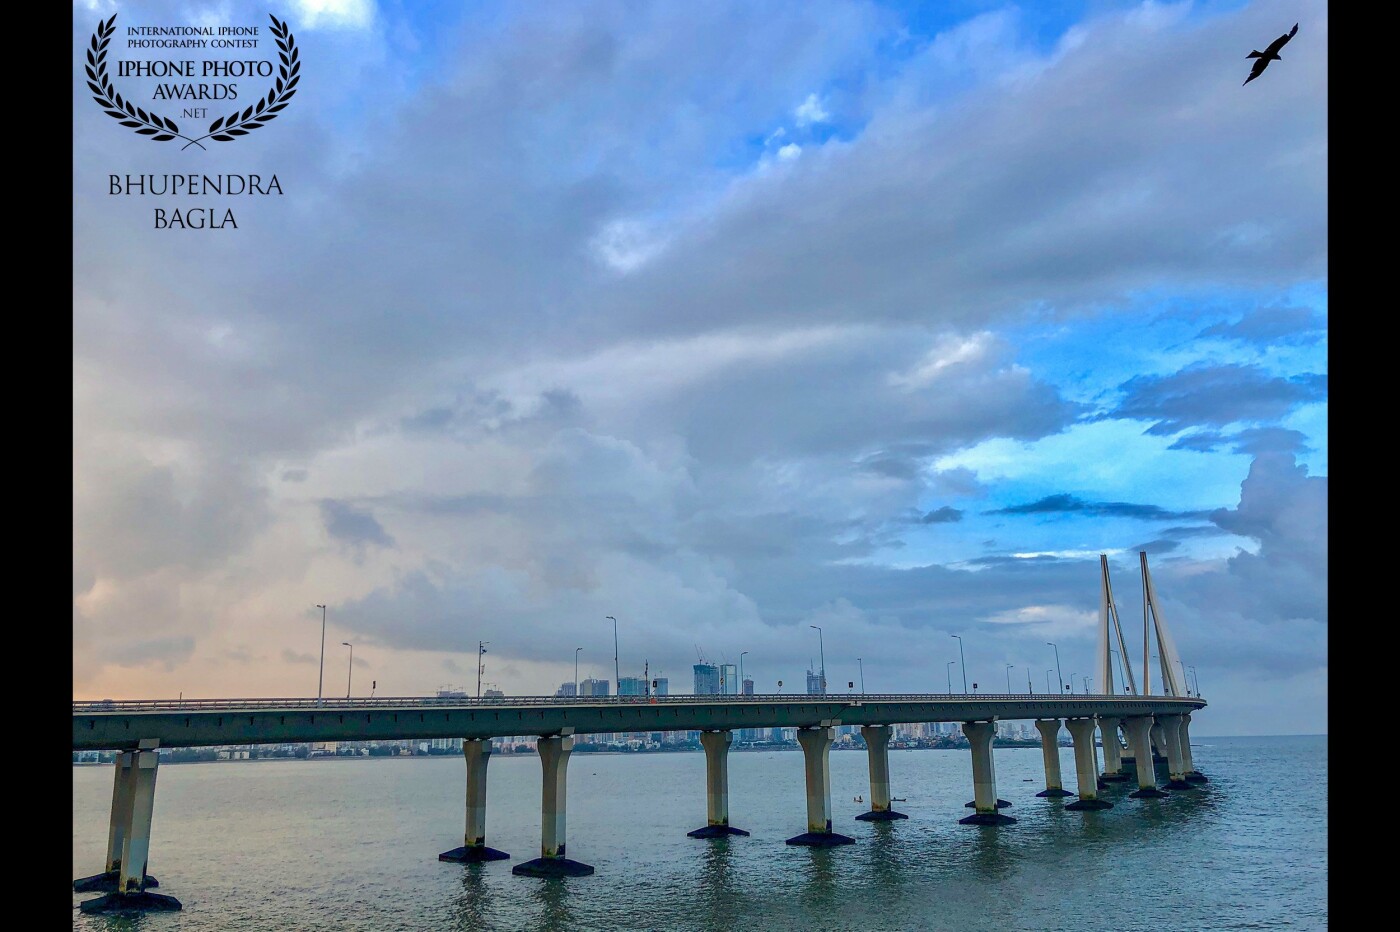 This was shot during my recent trip to Mumbai. I had captured this from the Bandra Fort early morning right after the sunrise. The Mumbai Sea Link Bridge looked really amazing right after the little showers that happened this morning as I had gone to shoot. The clouds and the eagle flying on the top made the perfect moment and I had to capture it. Overall the experience was unforgettable and the whole scene looked quite dramatic to be true. 